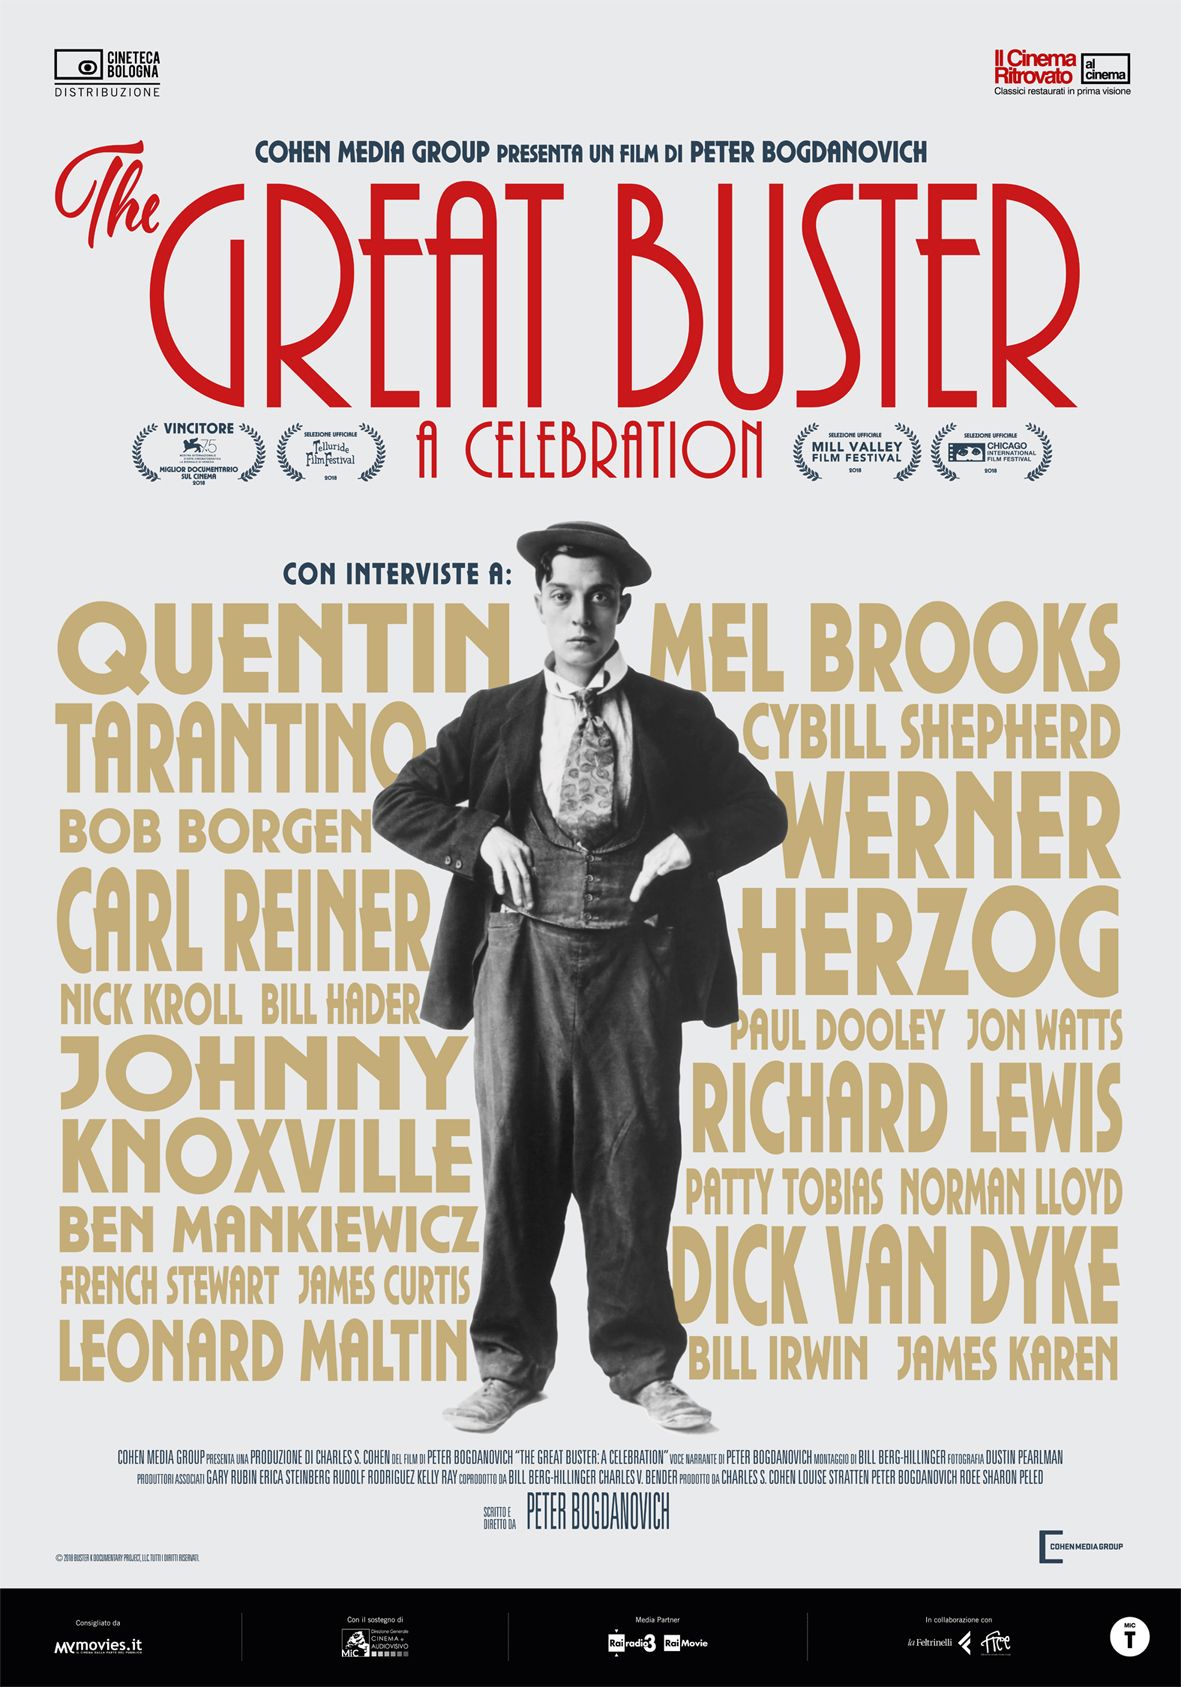 The Great Buster (Peter Bogdanovich)